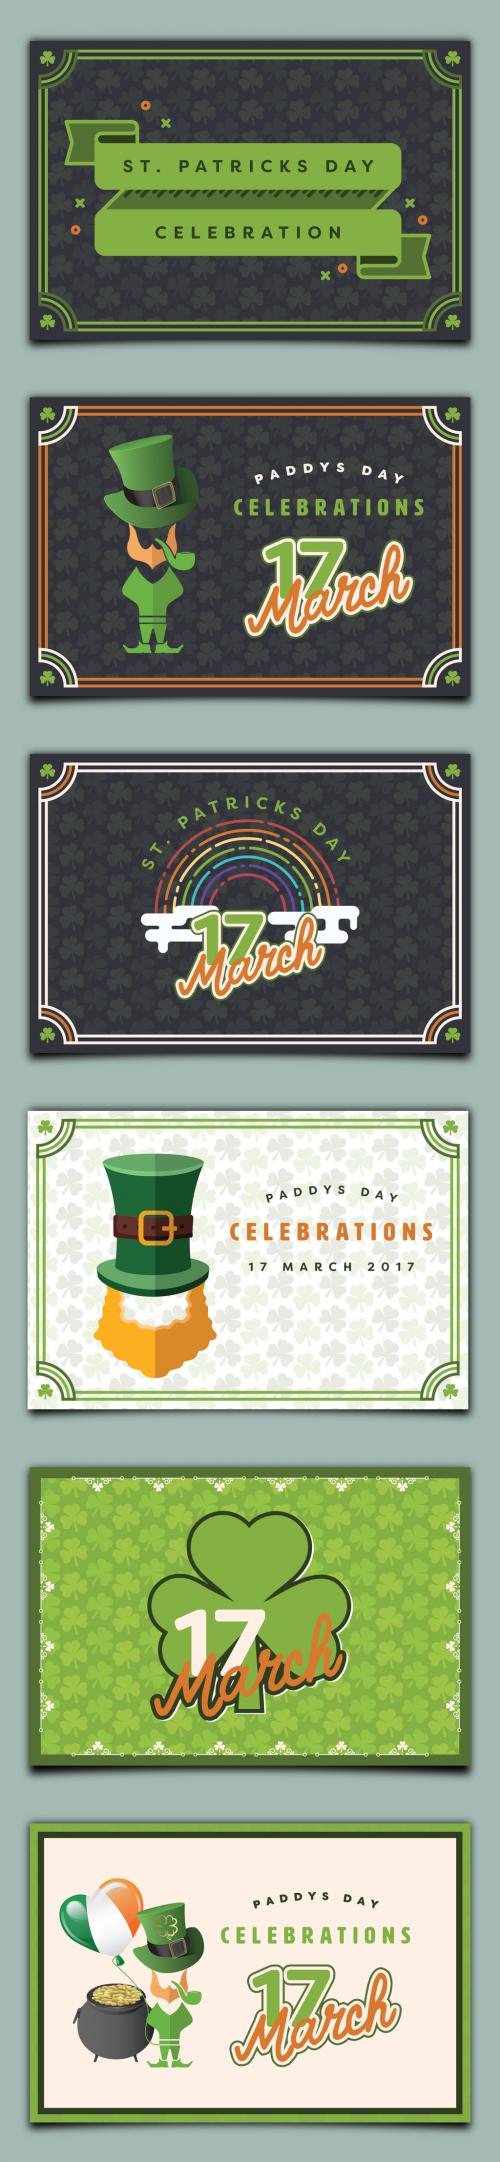 6 St. Patrick's Day Card Layouts - 136997912